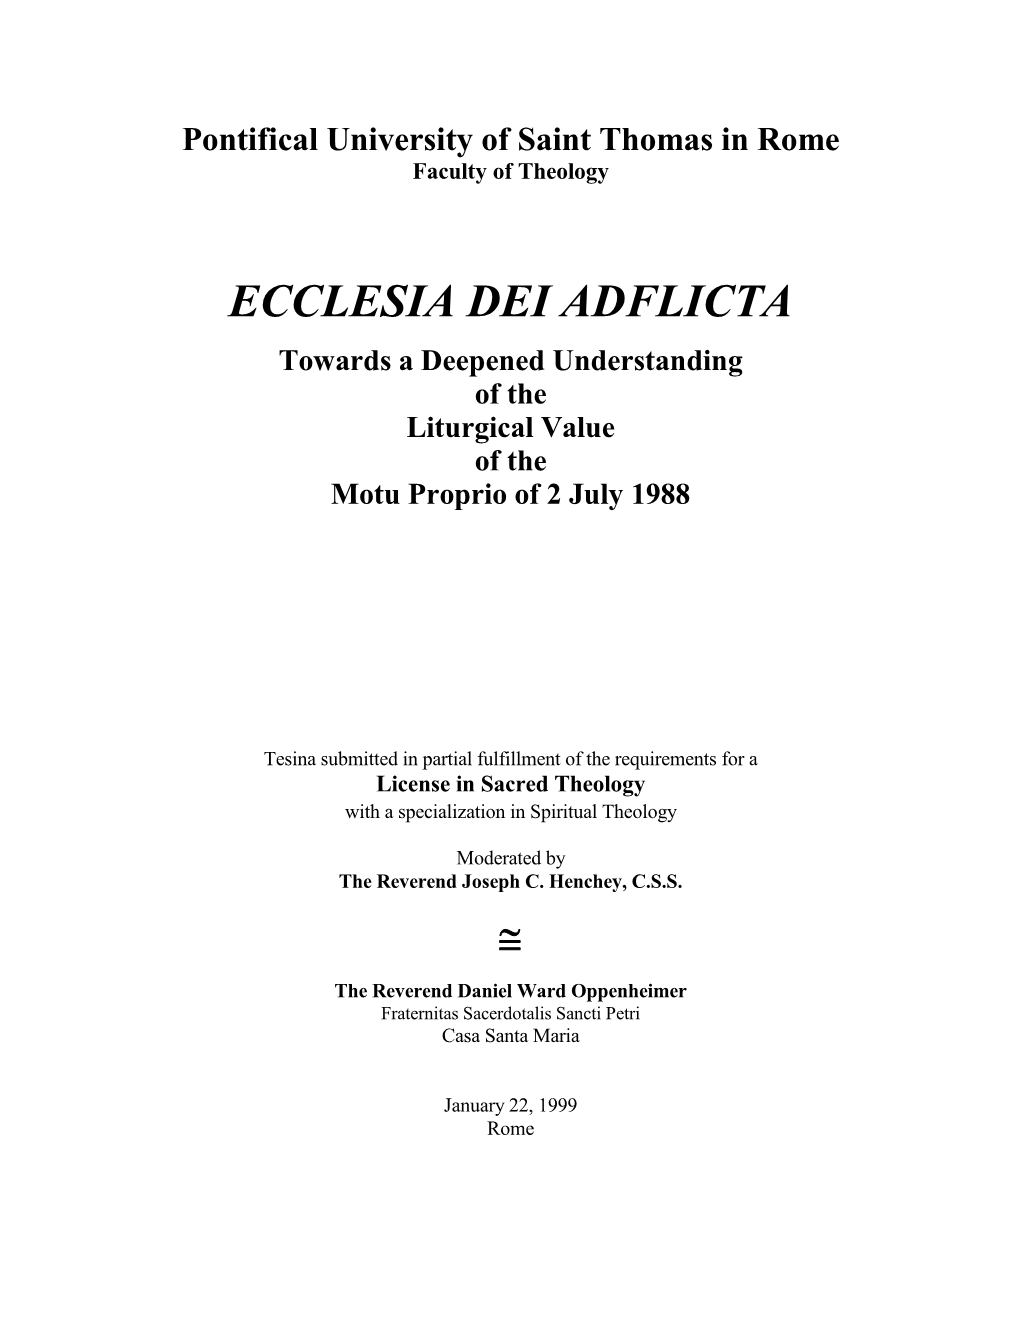 Towards a Deepened Understanding of the Liturgical Value of the Motu Proprio of 2 July 1988